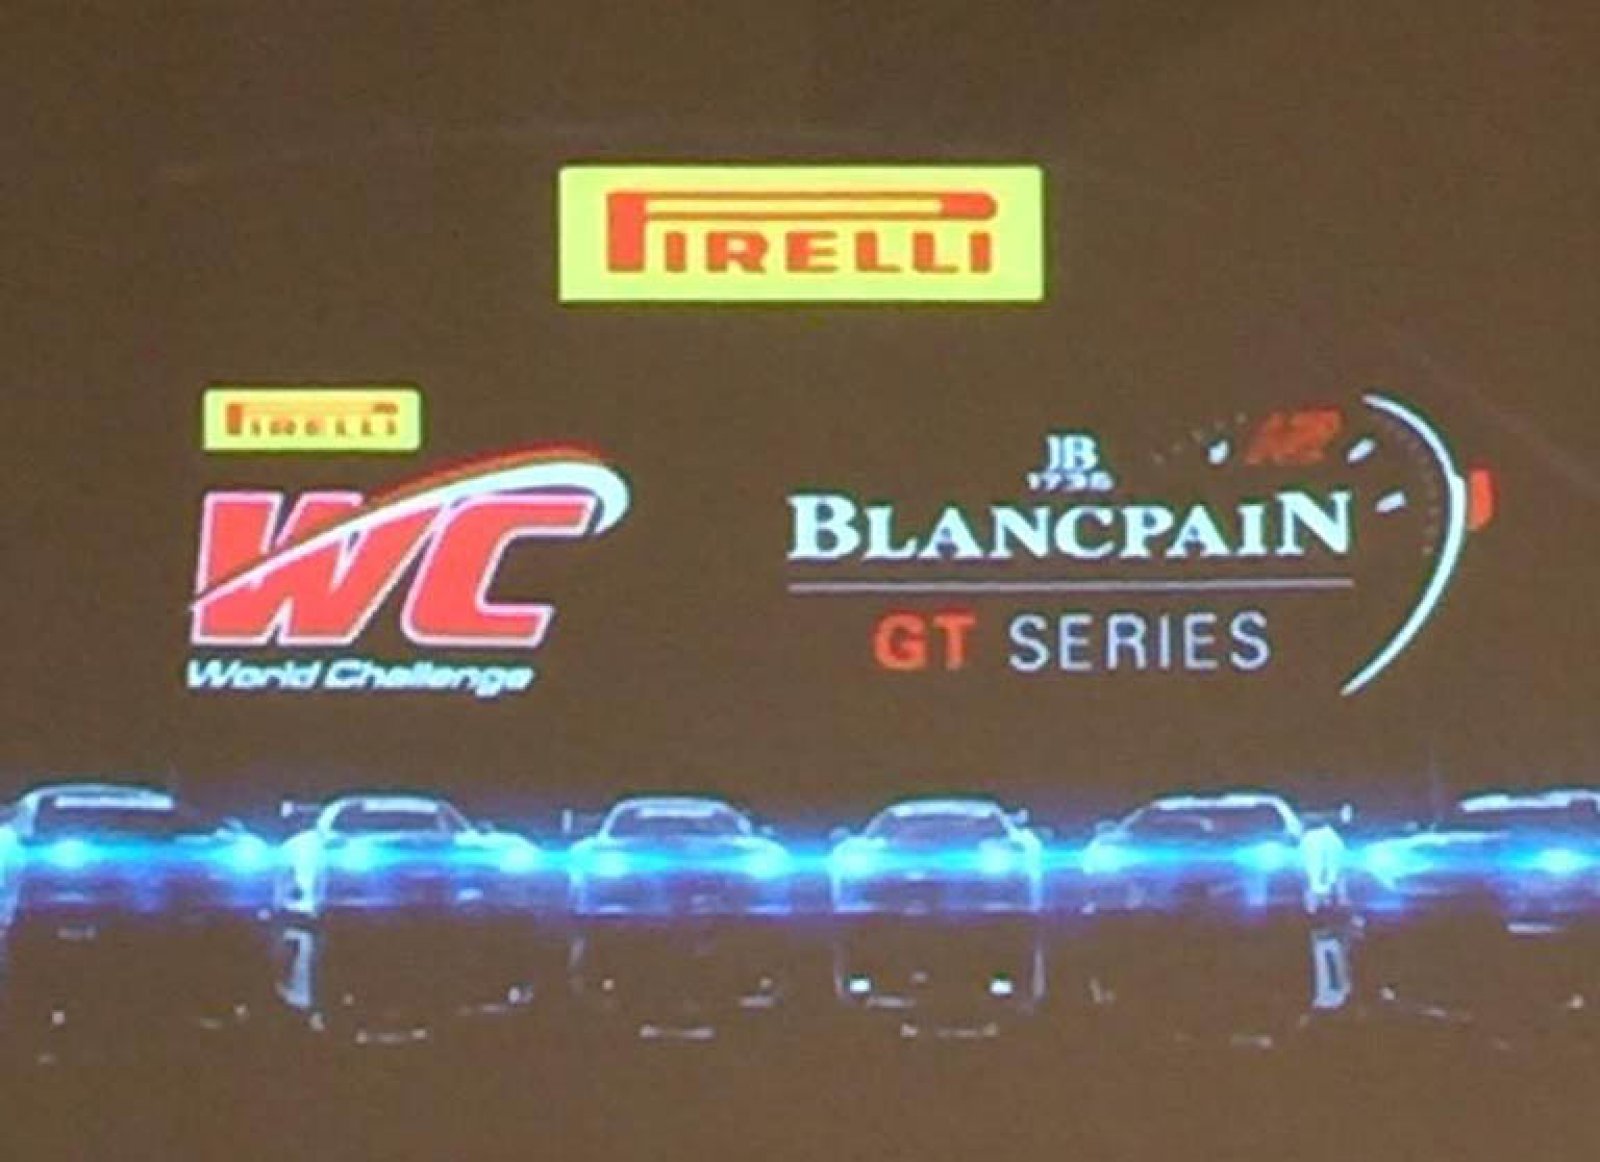 Extensive cooperation between Blancpain GT Series and Pirelli World Challenge